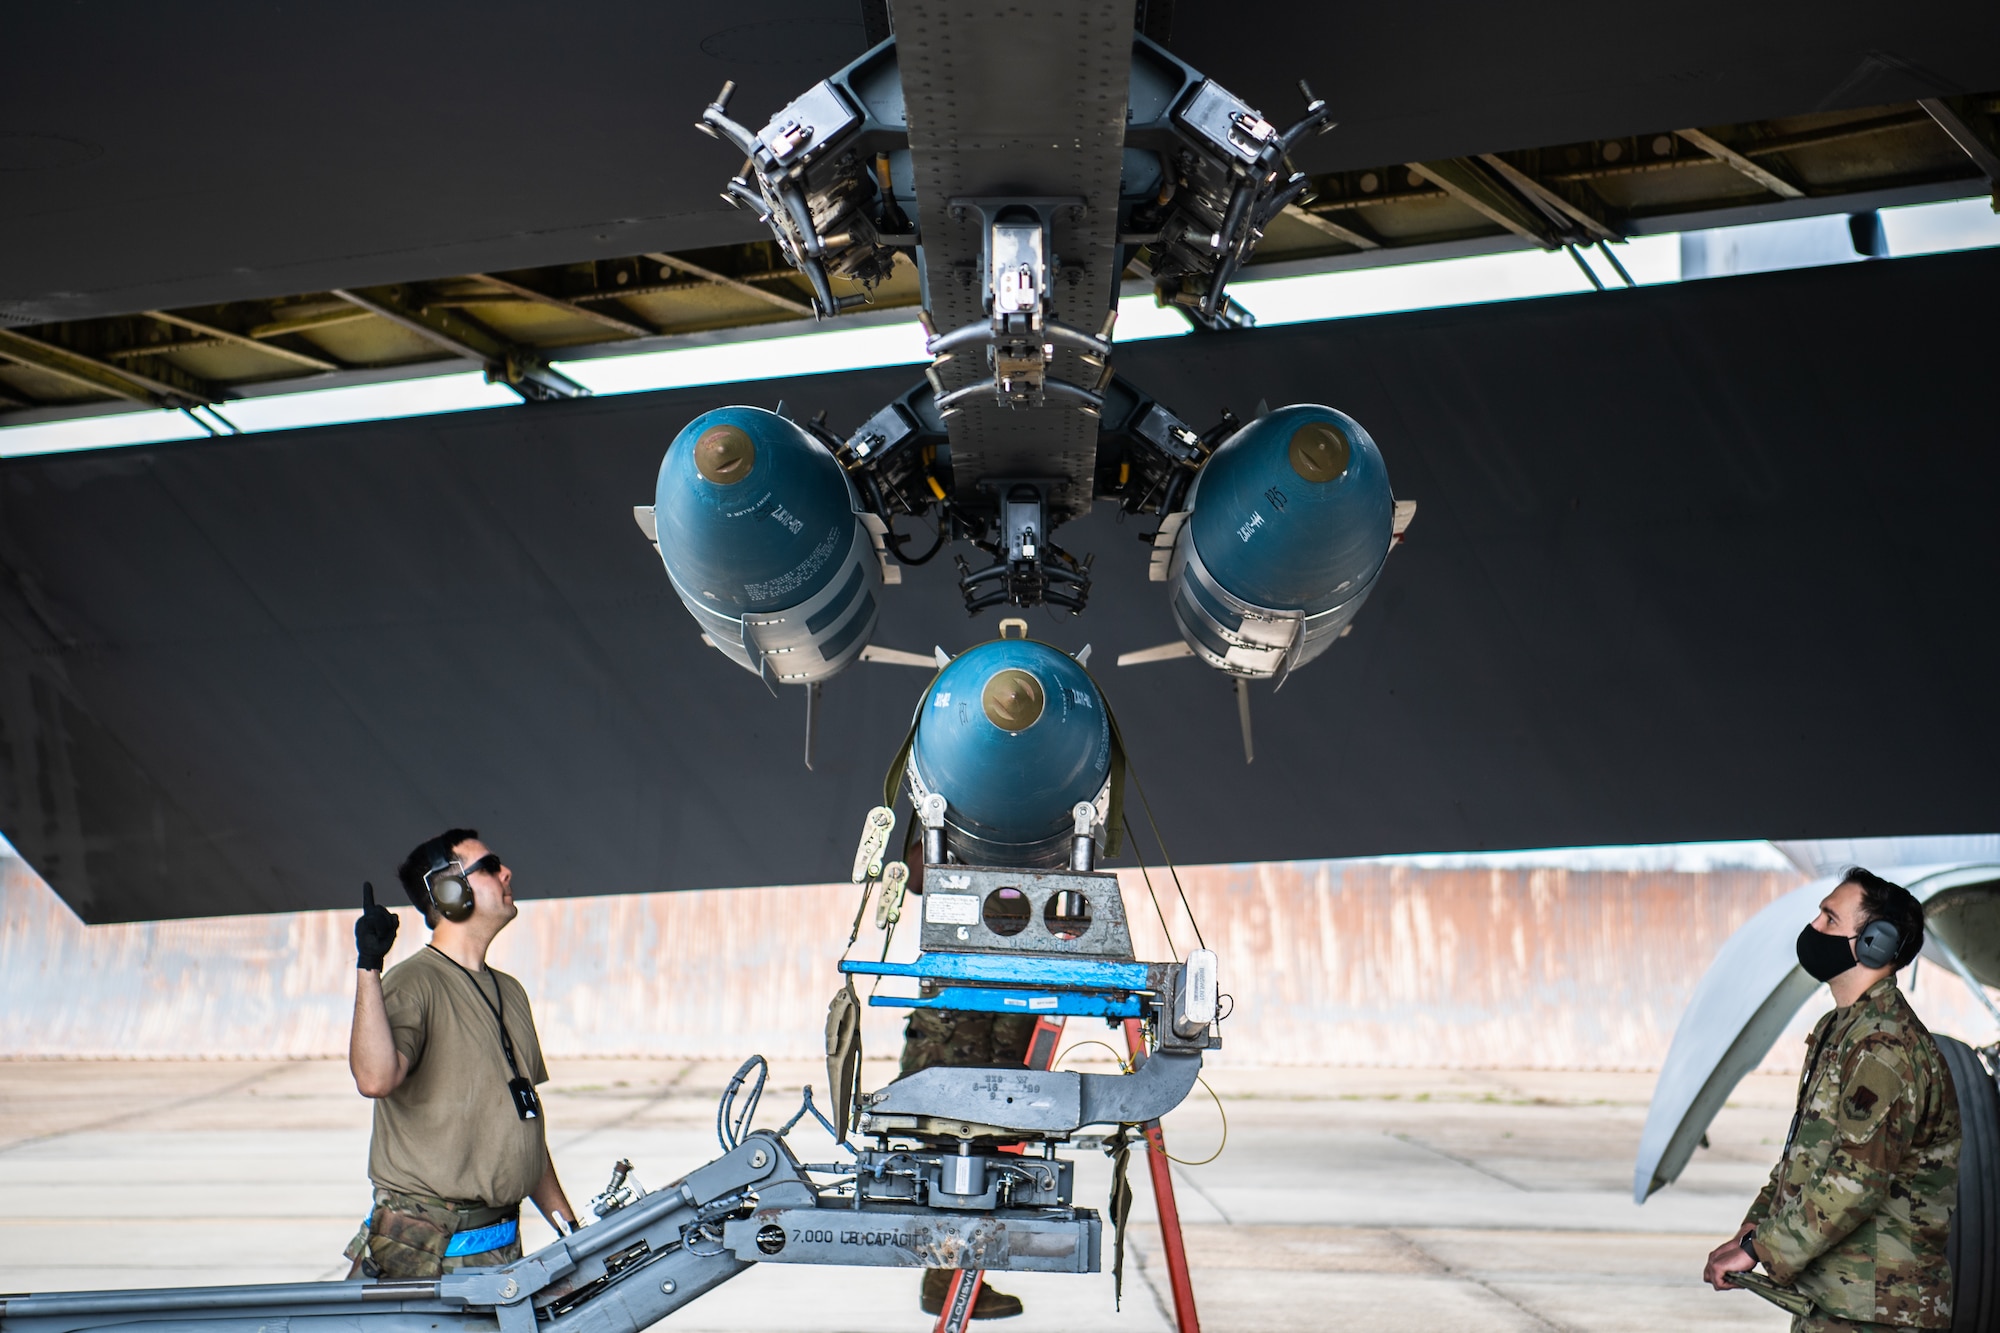 Staff Sgt. Patrick A. Labastida, 2nd Aircraft Maintenance Squadron weapons load crew chief, gives instructions to load a GBU-31 version 1 munition onto a B-52H Stratofortress during Combat Hammer at Barksdale Air Force Base, La., March 10, 2021. Participating in exercises like Combat Hammer is important for Airmen of the 2nd Bomb Wing because it allows all facets of the 2nd BW to get repetitions in generating combat power. (U.S. Air Force photo by Airman 1st Class Jacob B. Wrightsman)